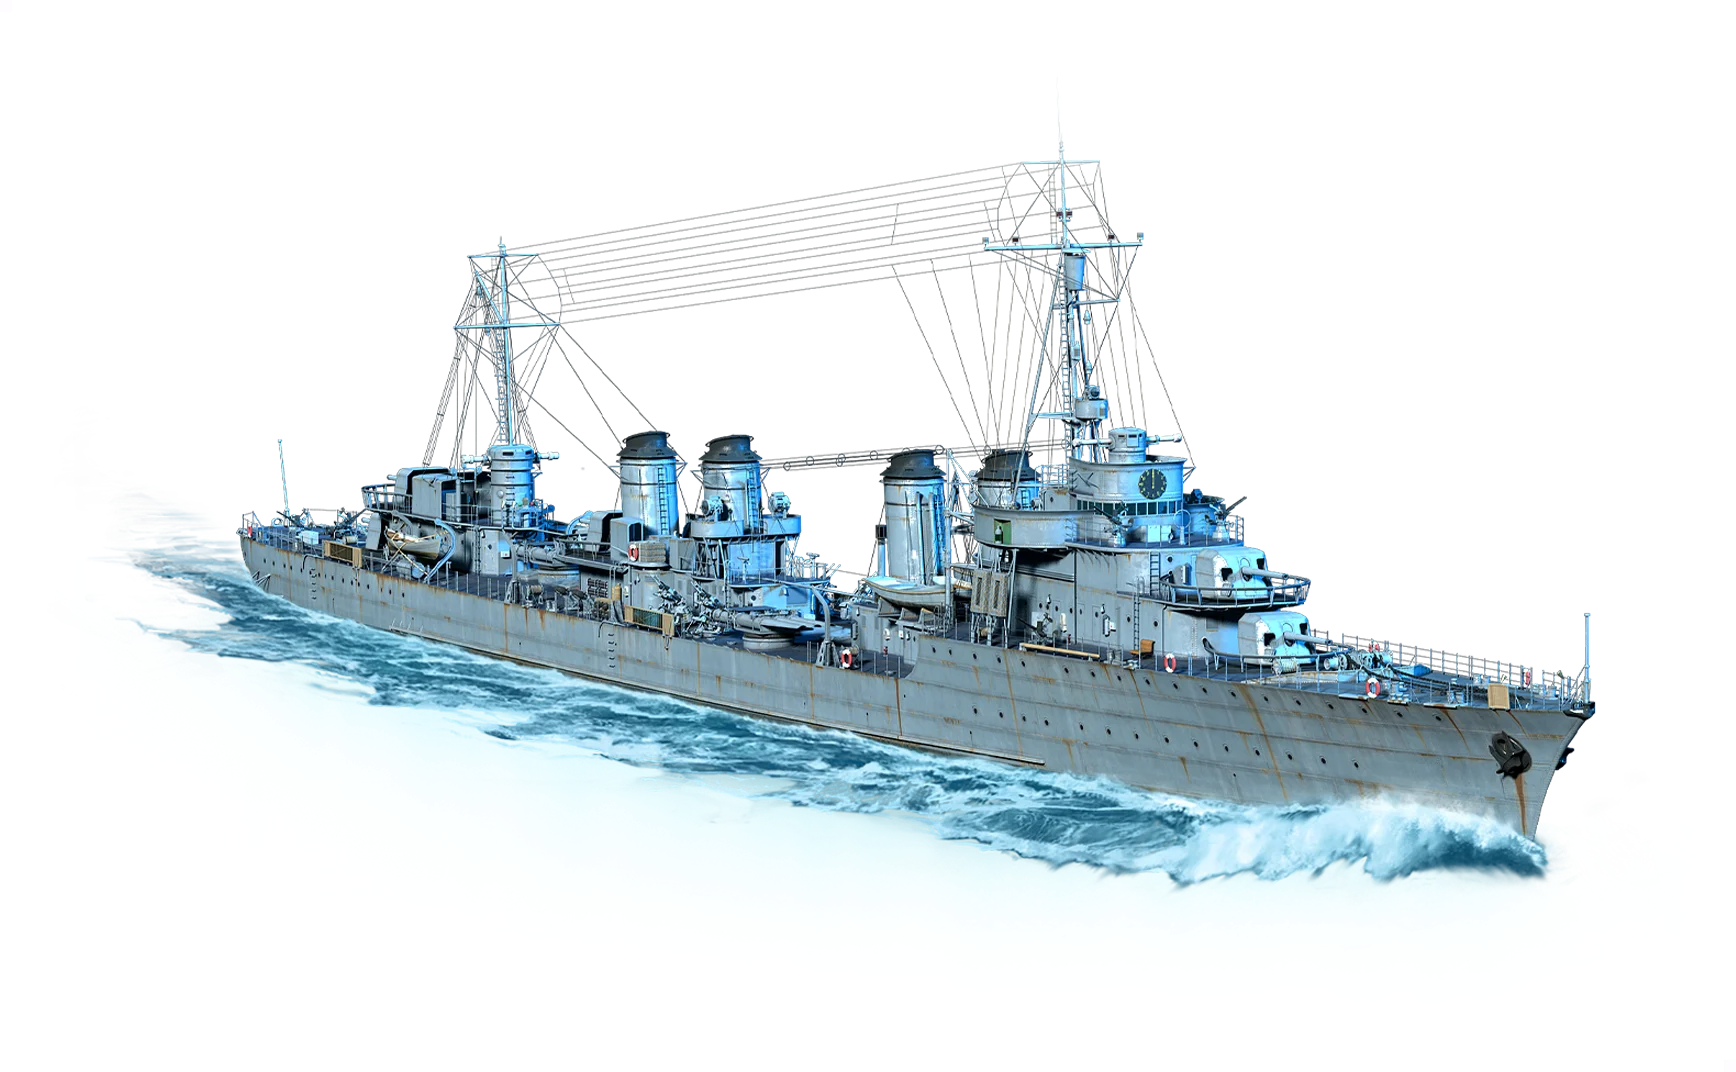 Vauquelin from World Of Warships: Legends